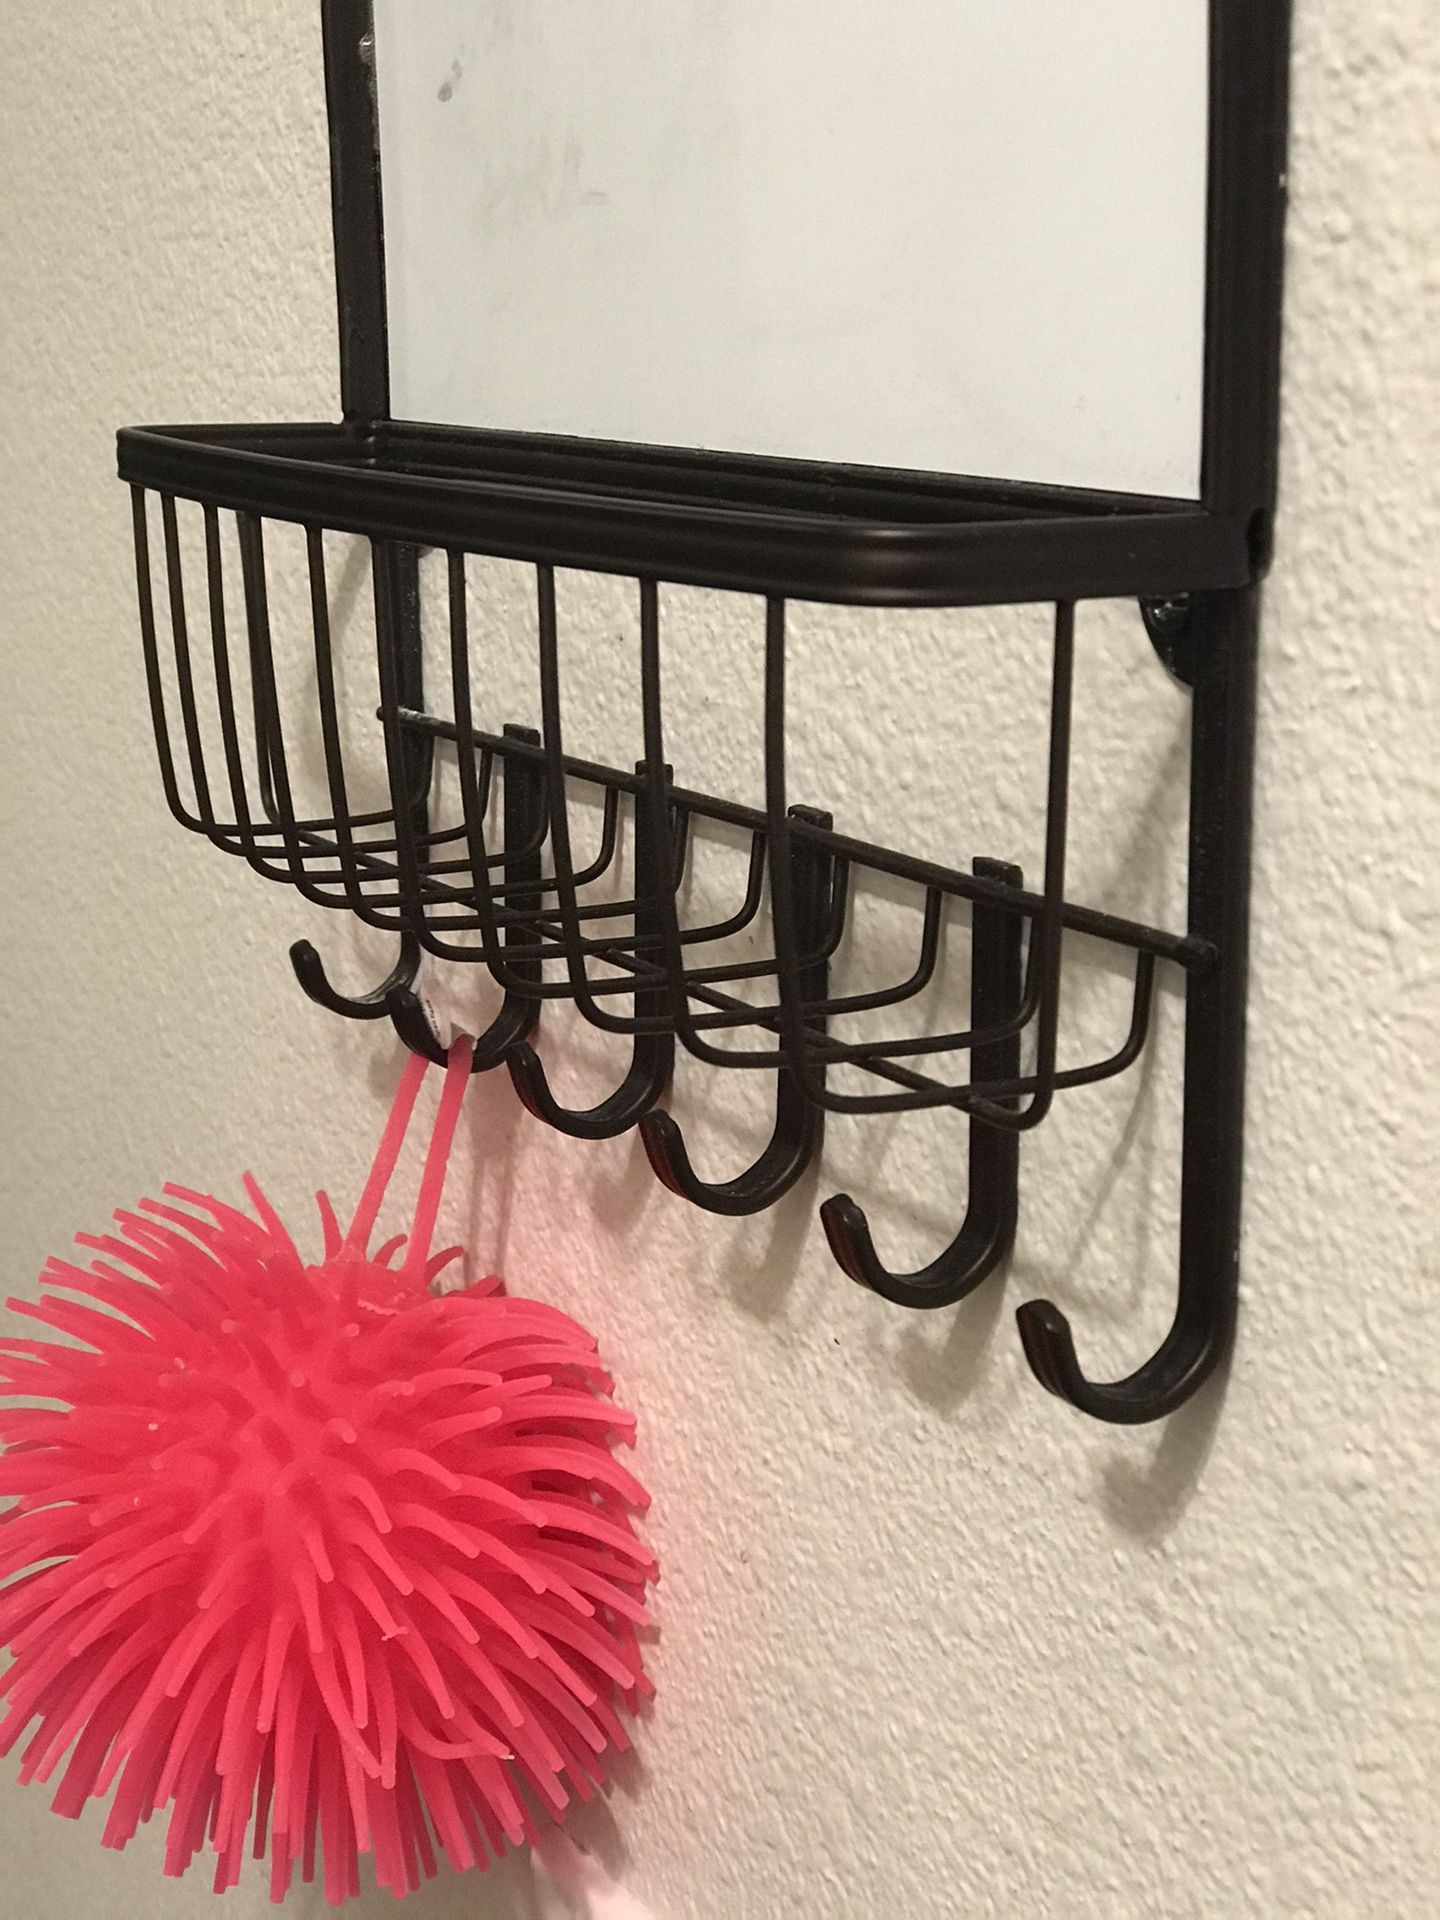 Mail holder with white board